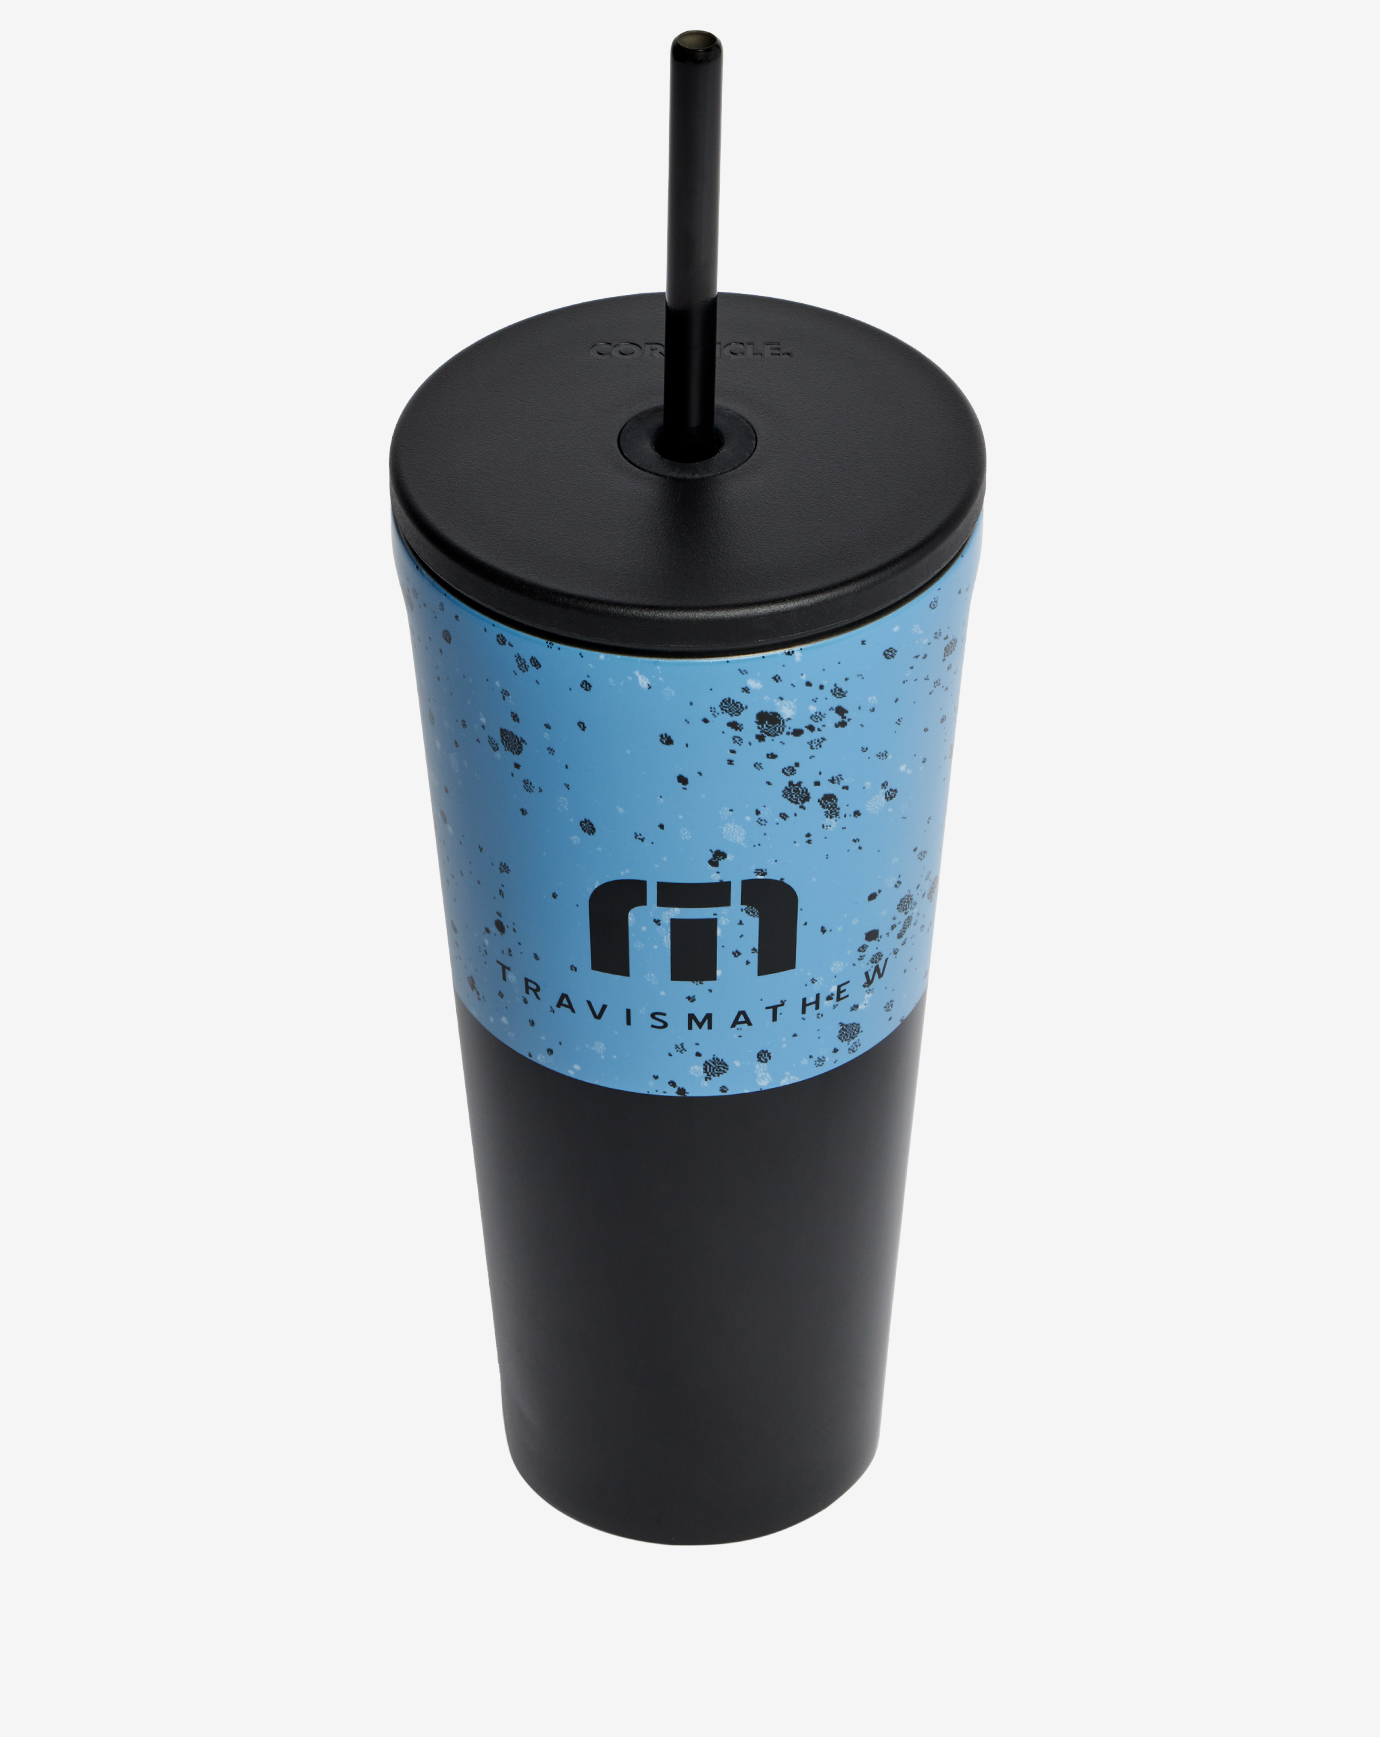 Personalized Sims Cold Tumbler 